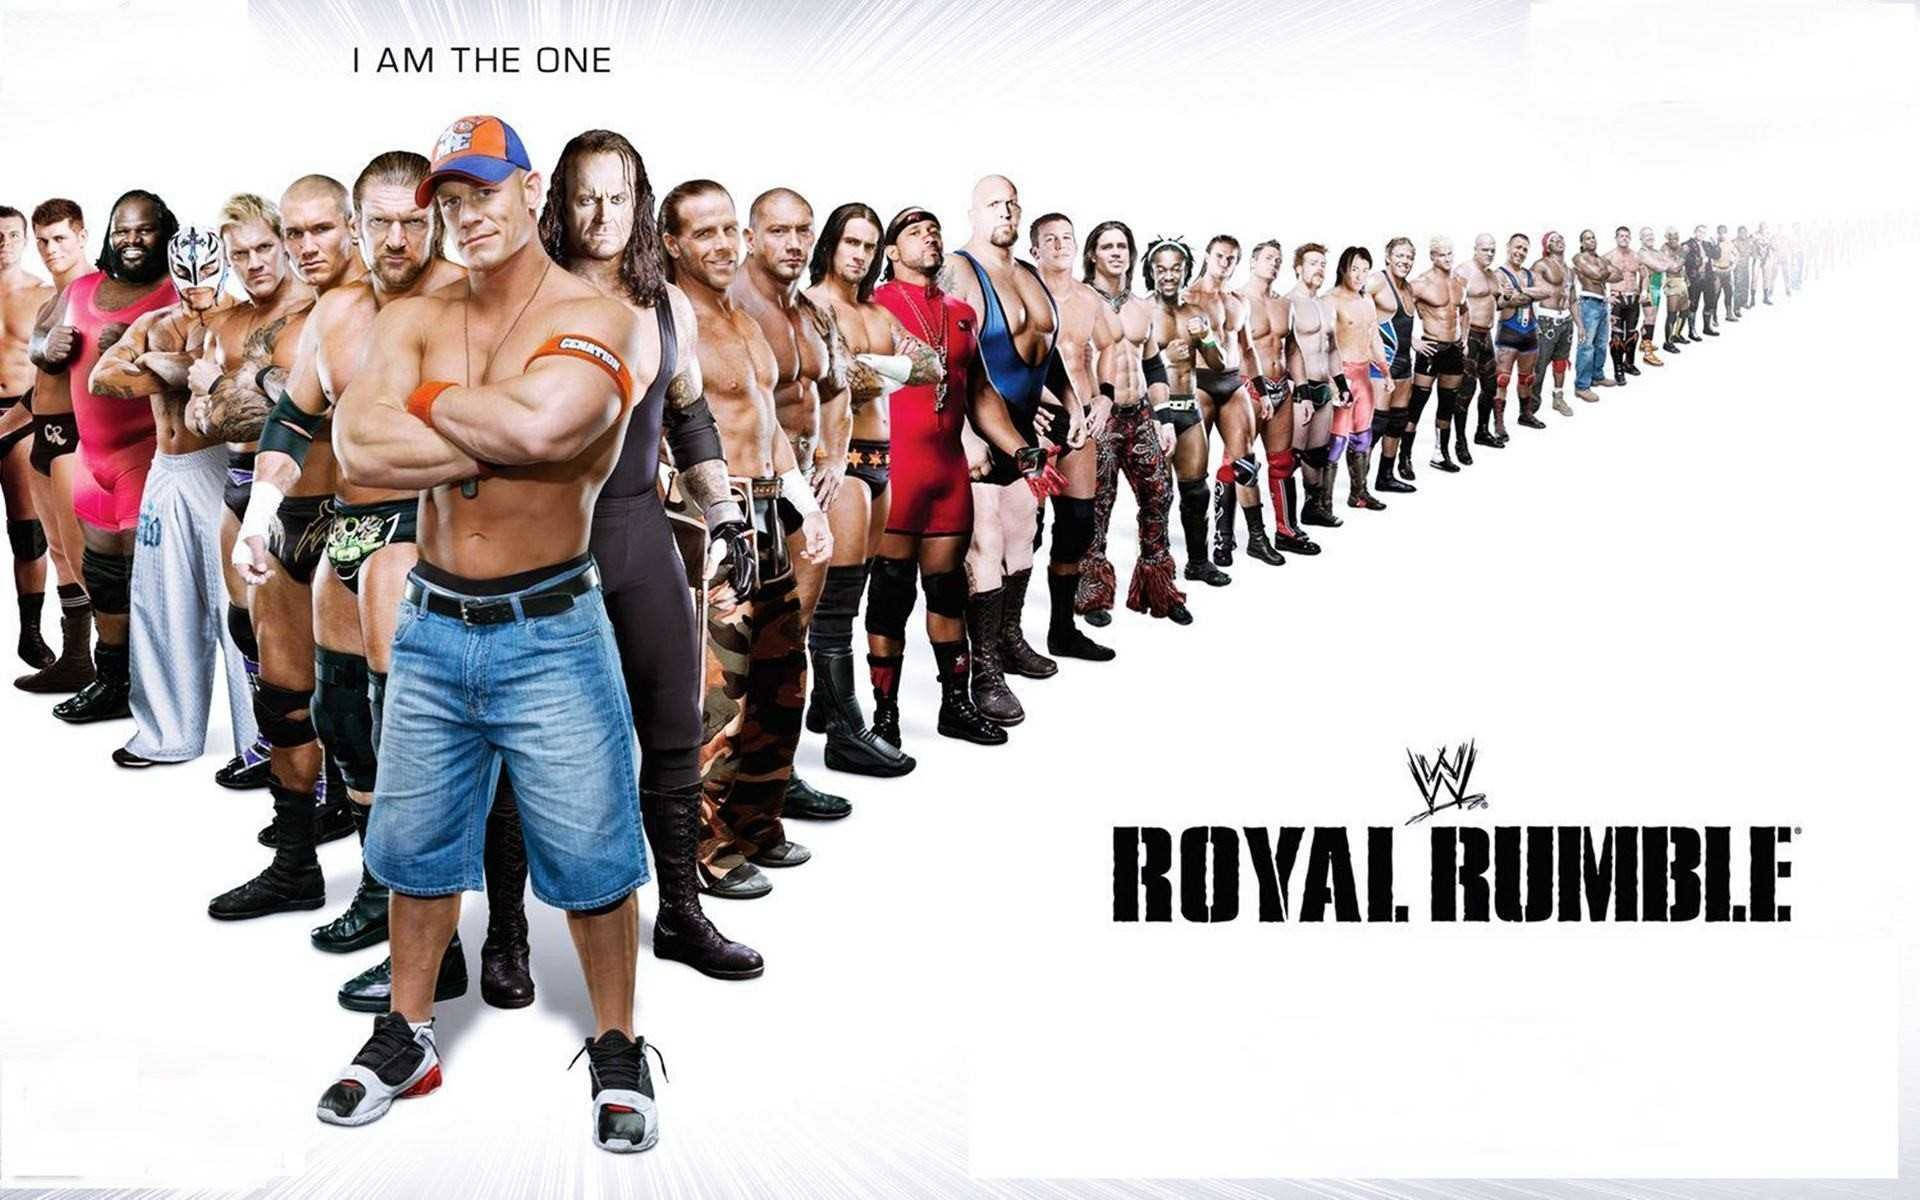 Get Ready For Action! Experience an Epic Royal Rumble Wallpaper